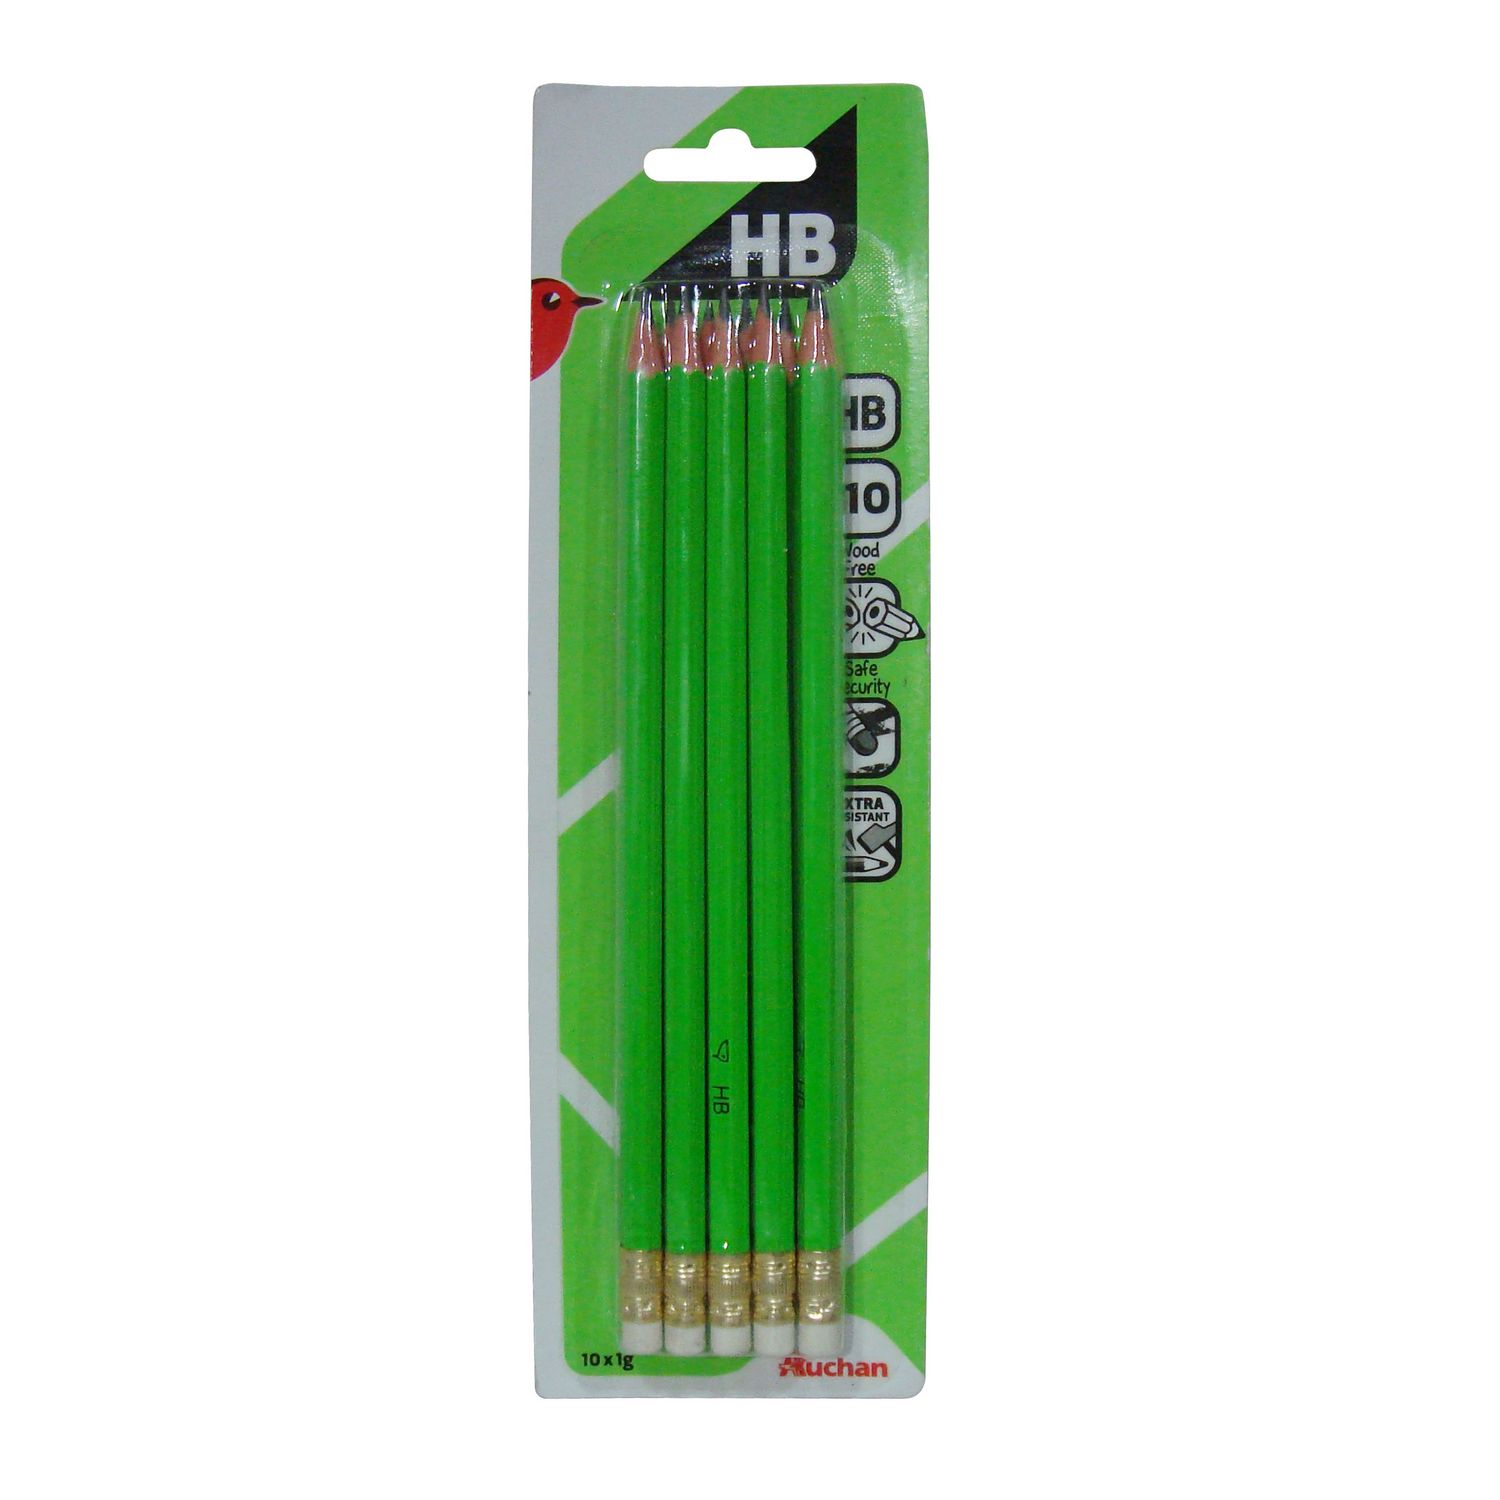 HYPERBURO  CRAYON GRAPHITE HB EMBOUT GOMME